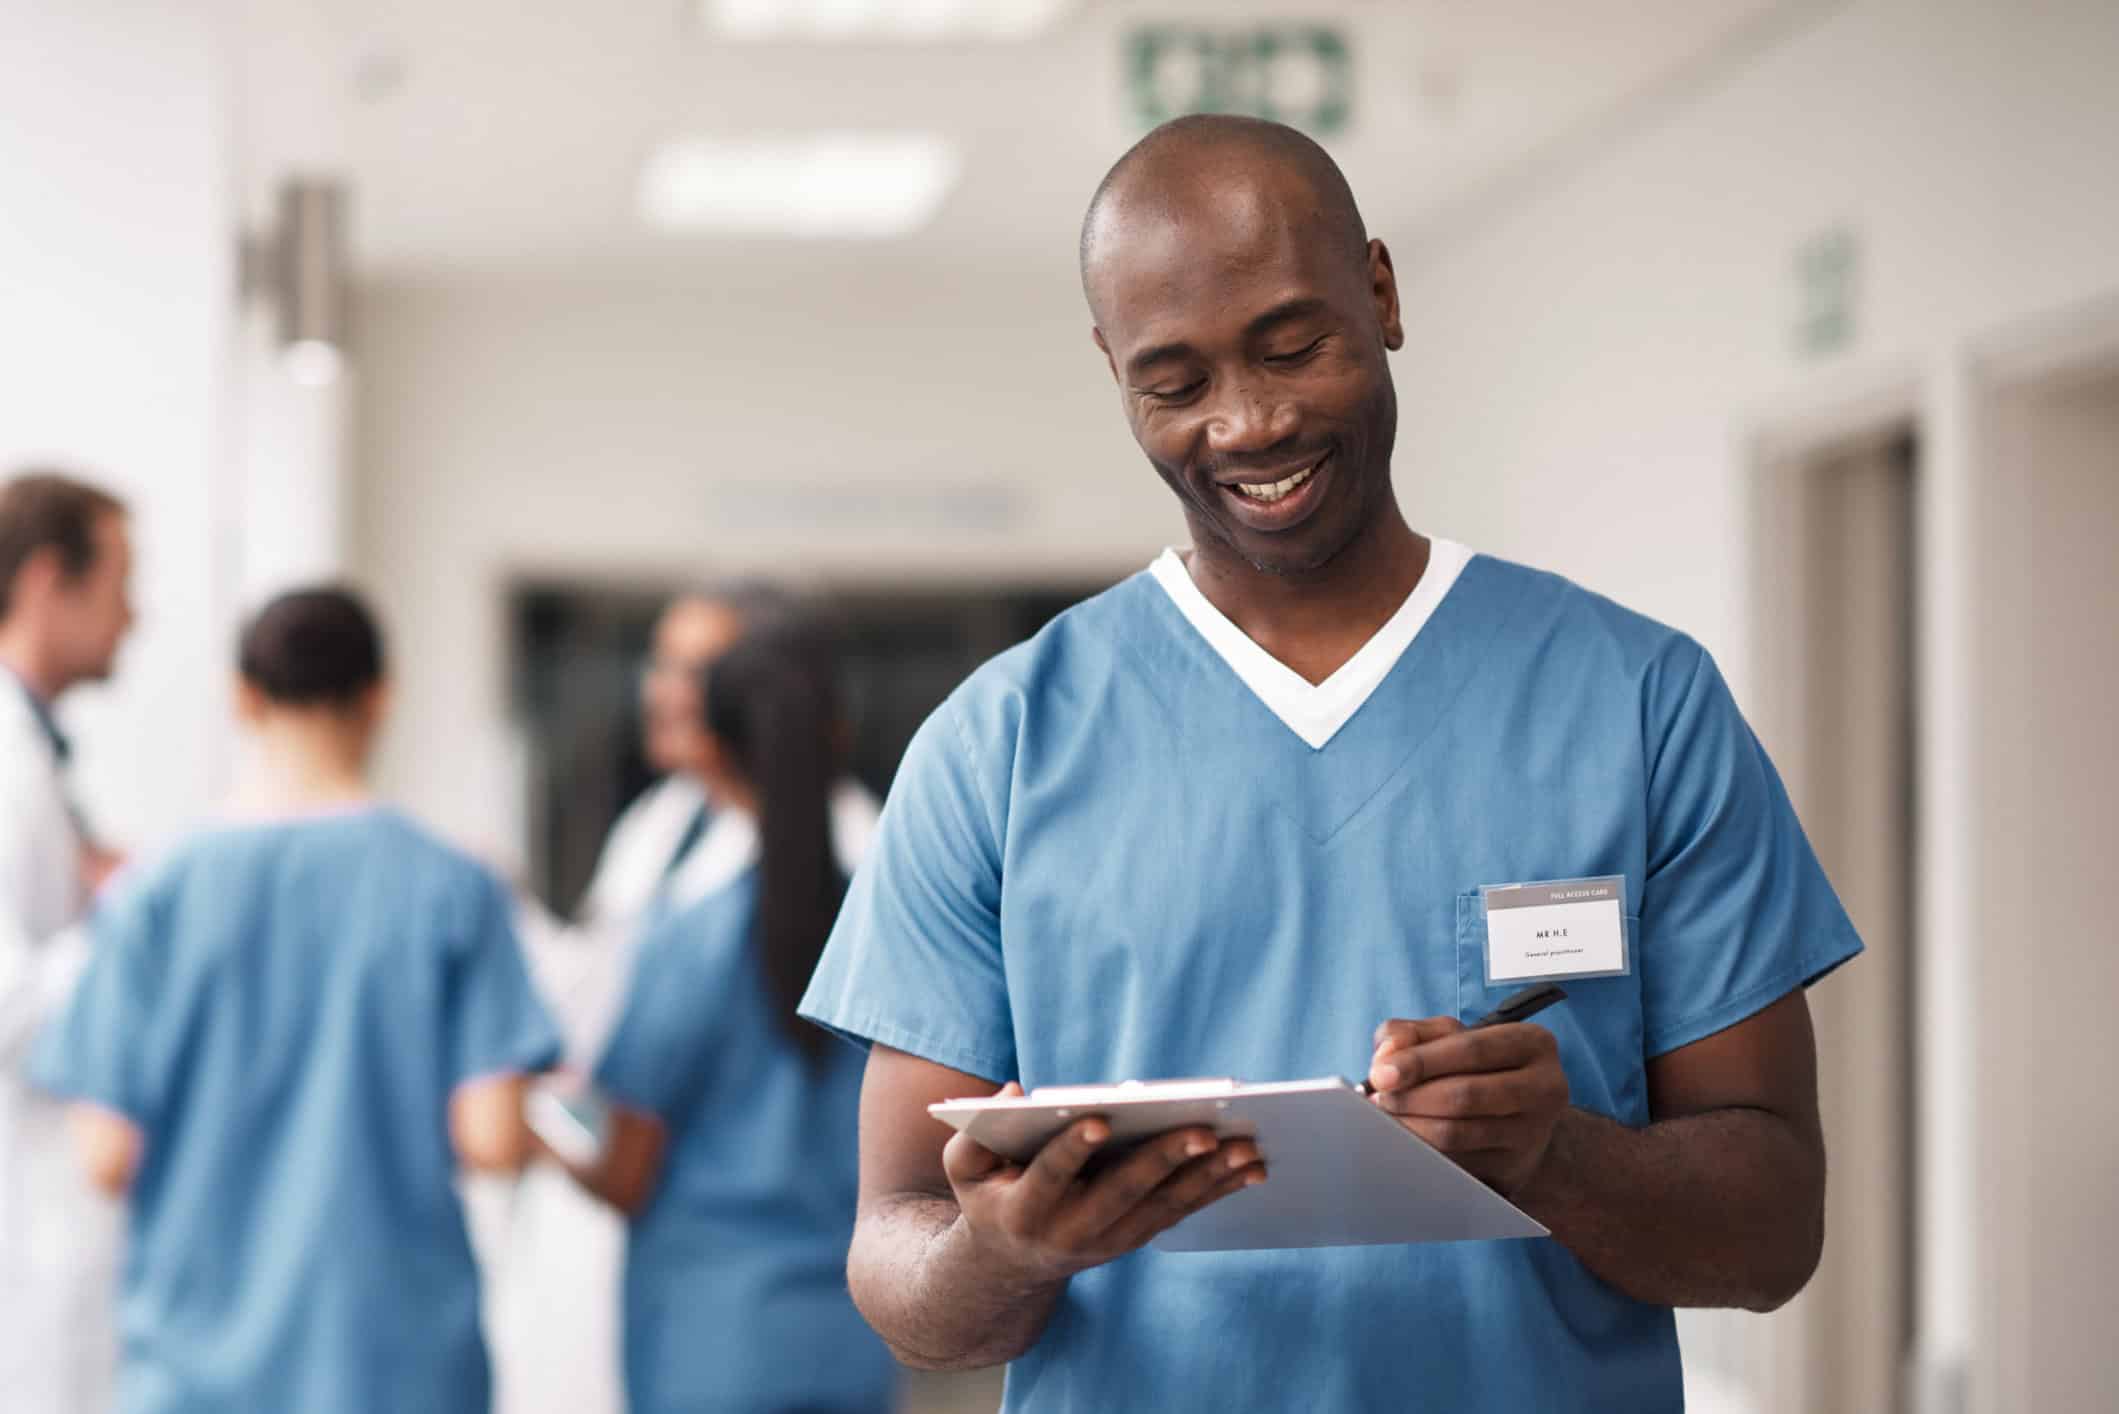 Insurance documents, clipboard and a black doctor writing patient info. Clinic healthcare employee or male nurse with a smile, consulting a medical chart. A man in scrubs, smiling in hospital hallway